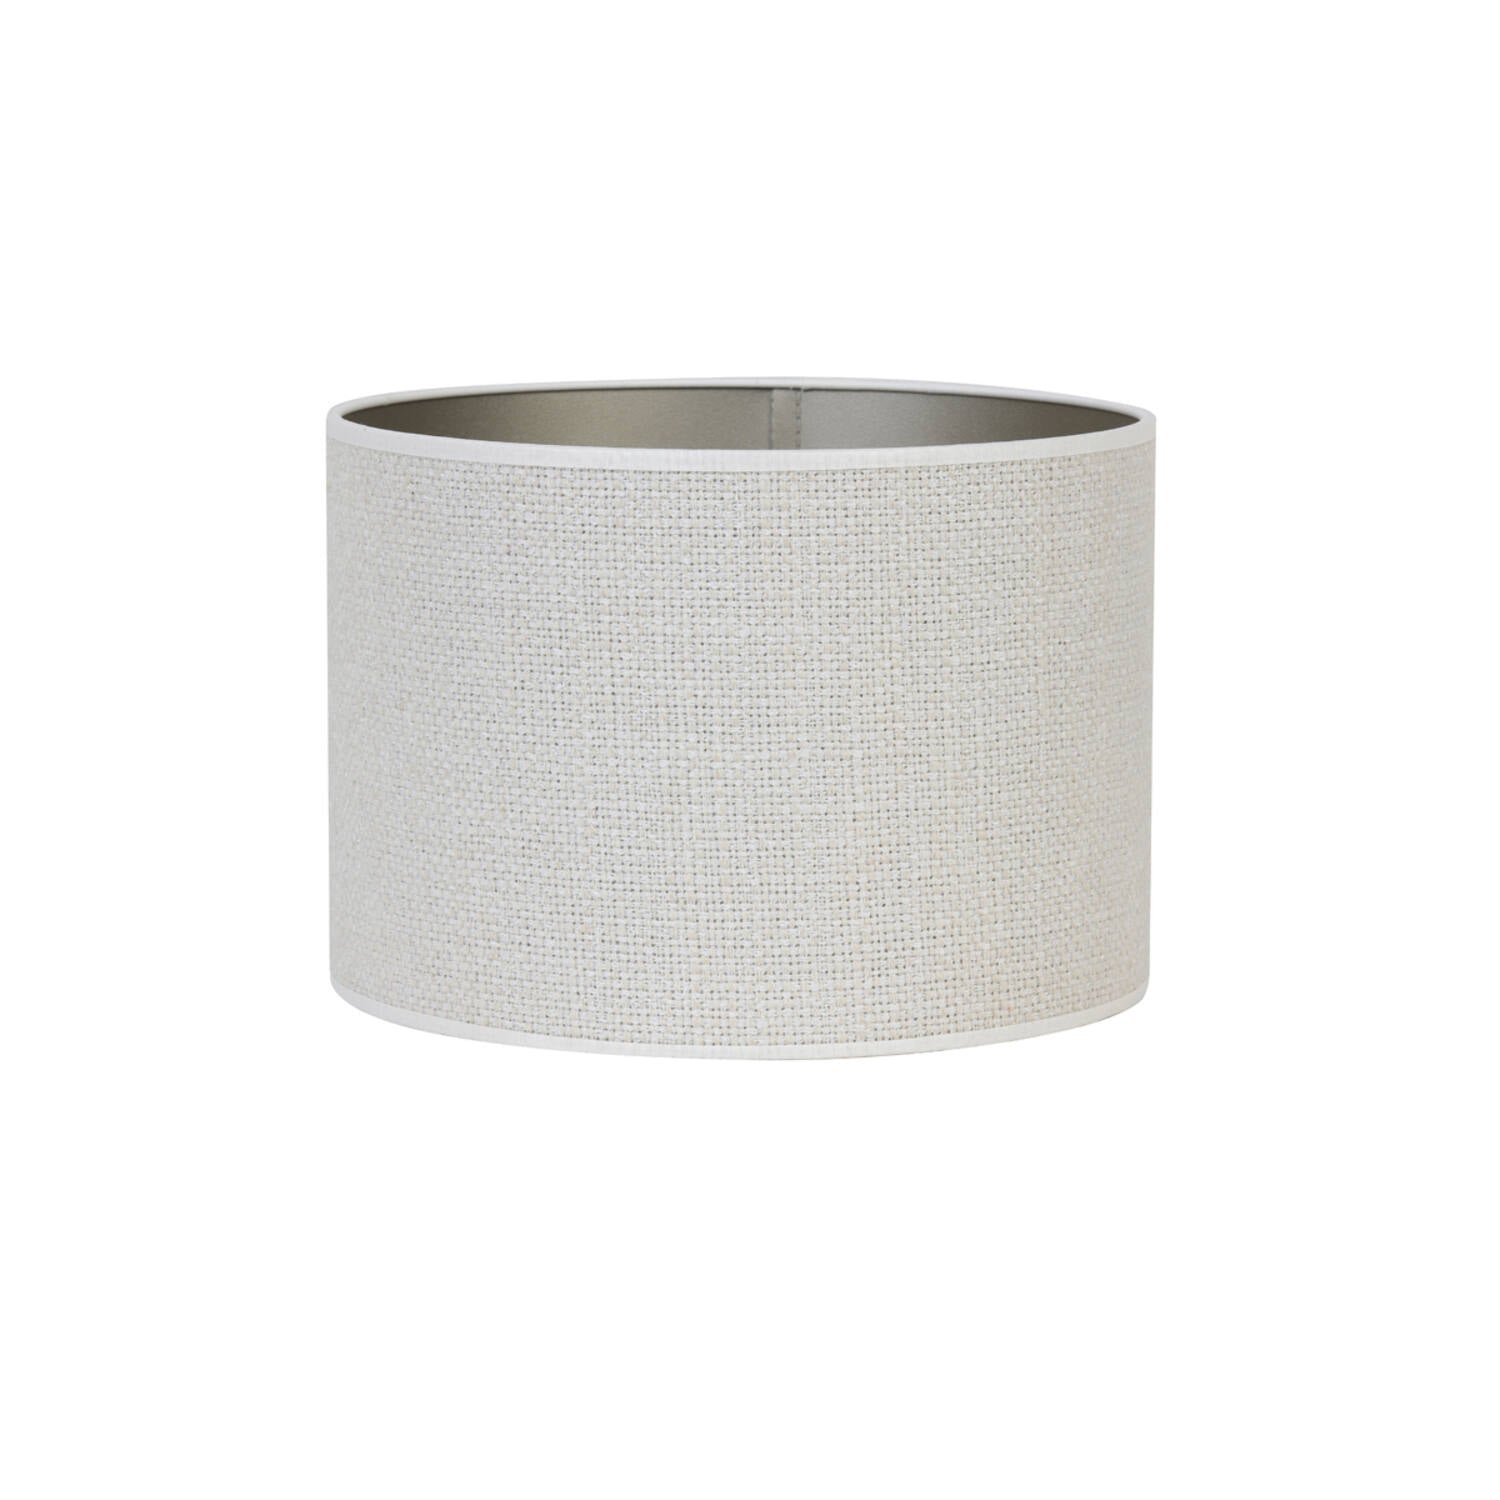 Off white textured lamp shade.